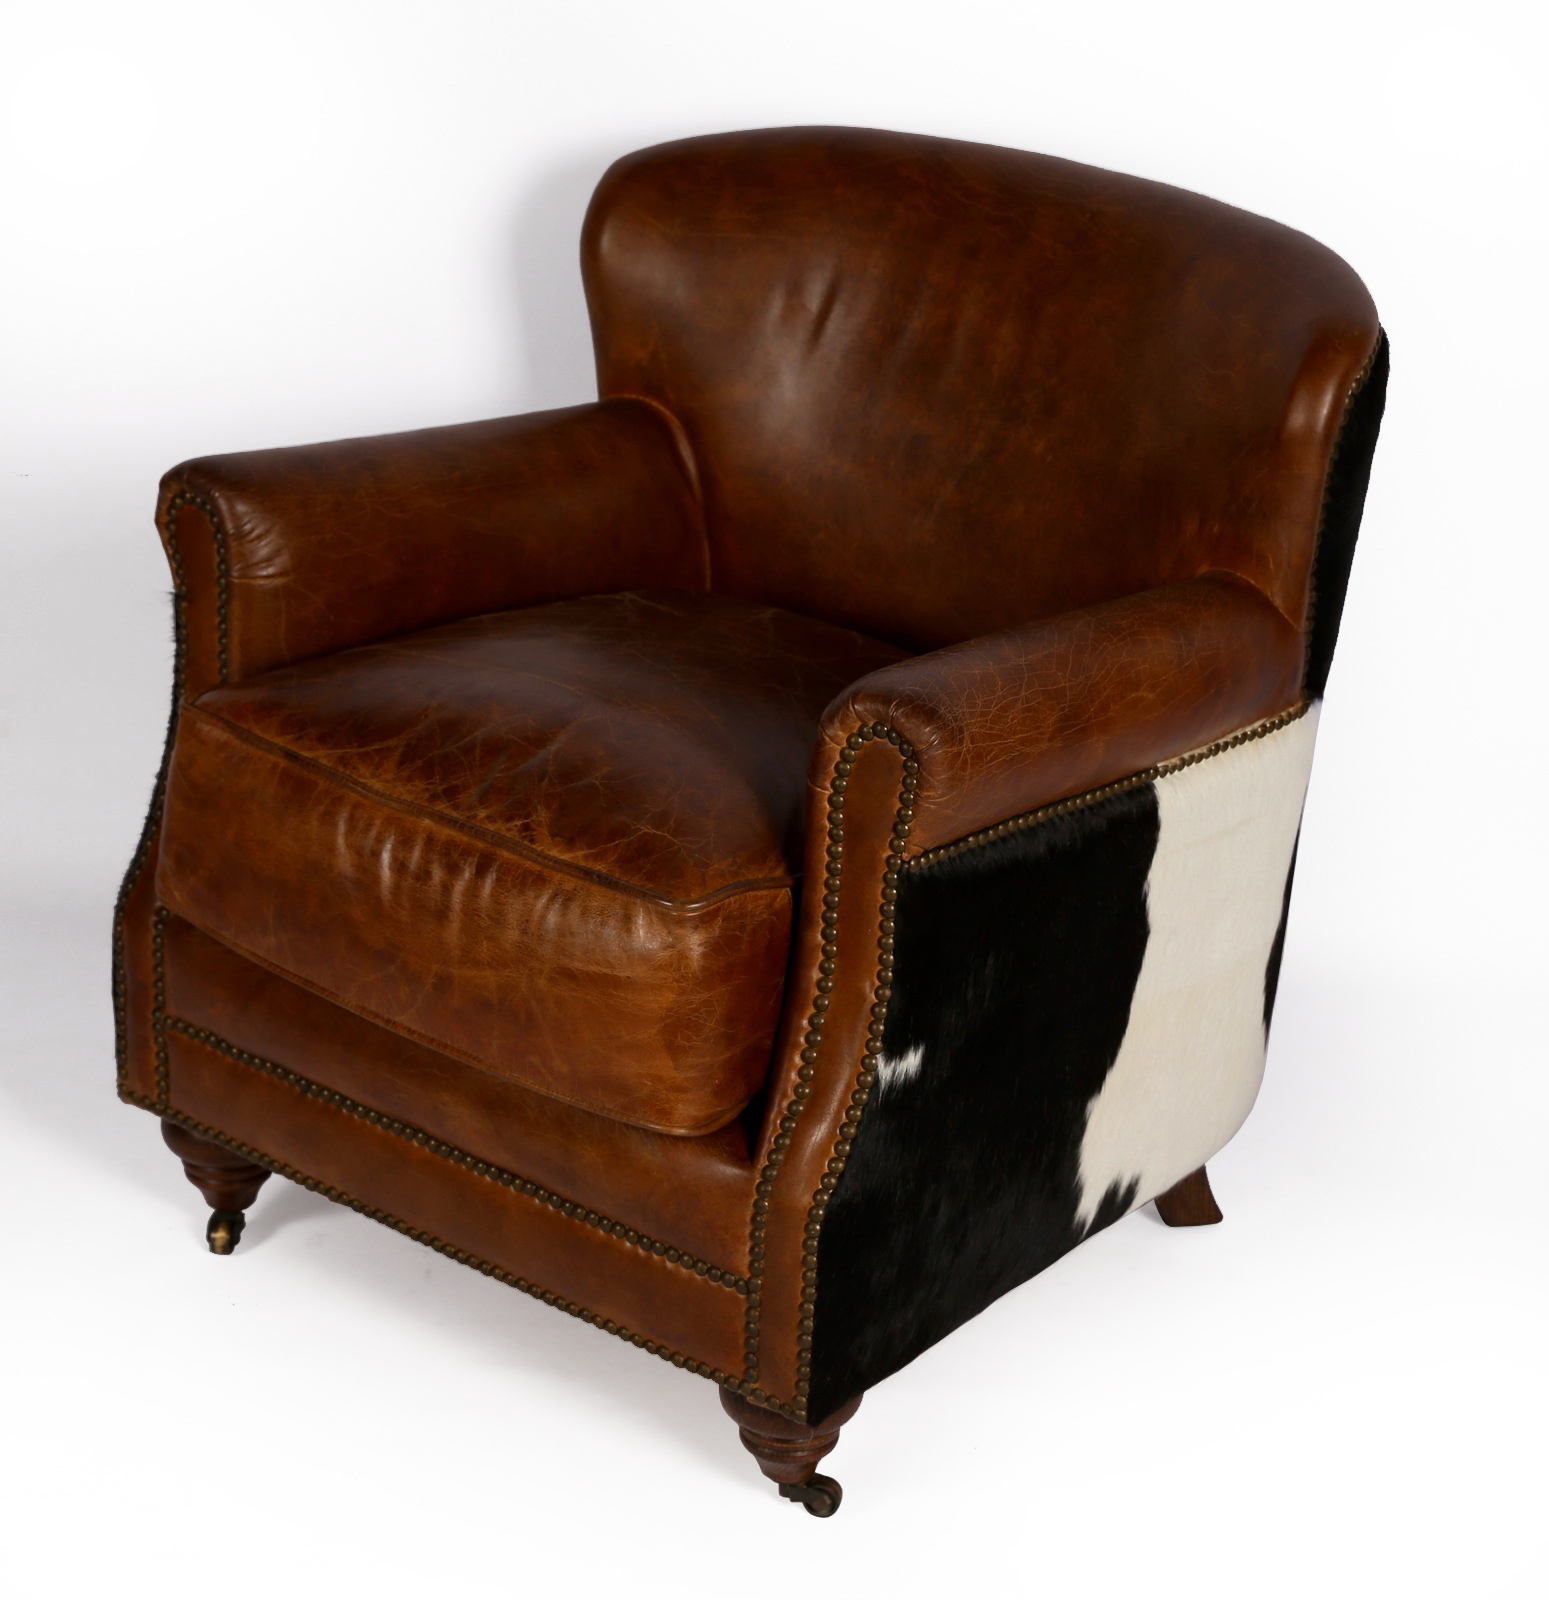 Hoss Classic Rawhide Leather Chair